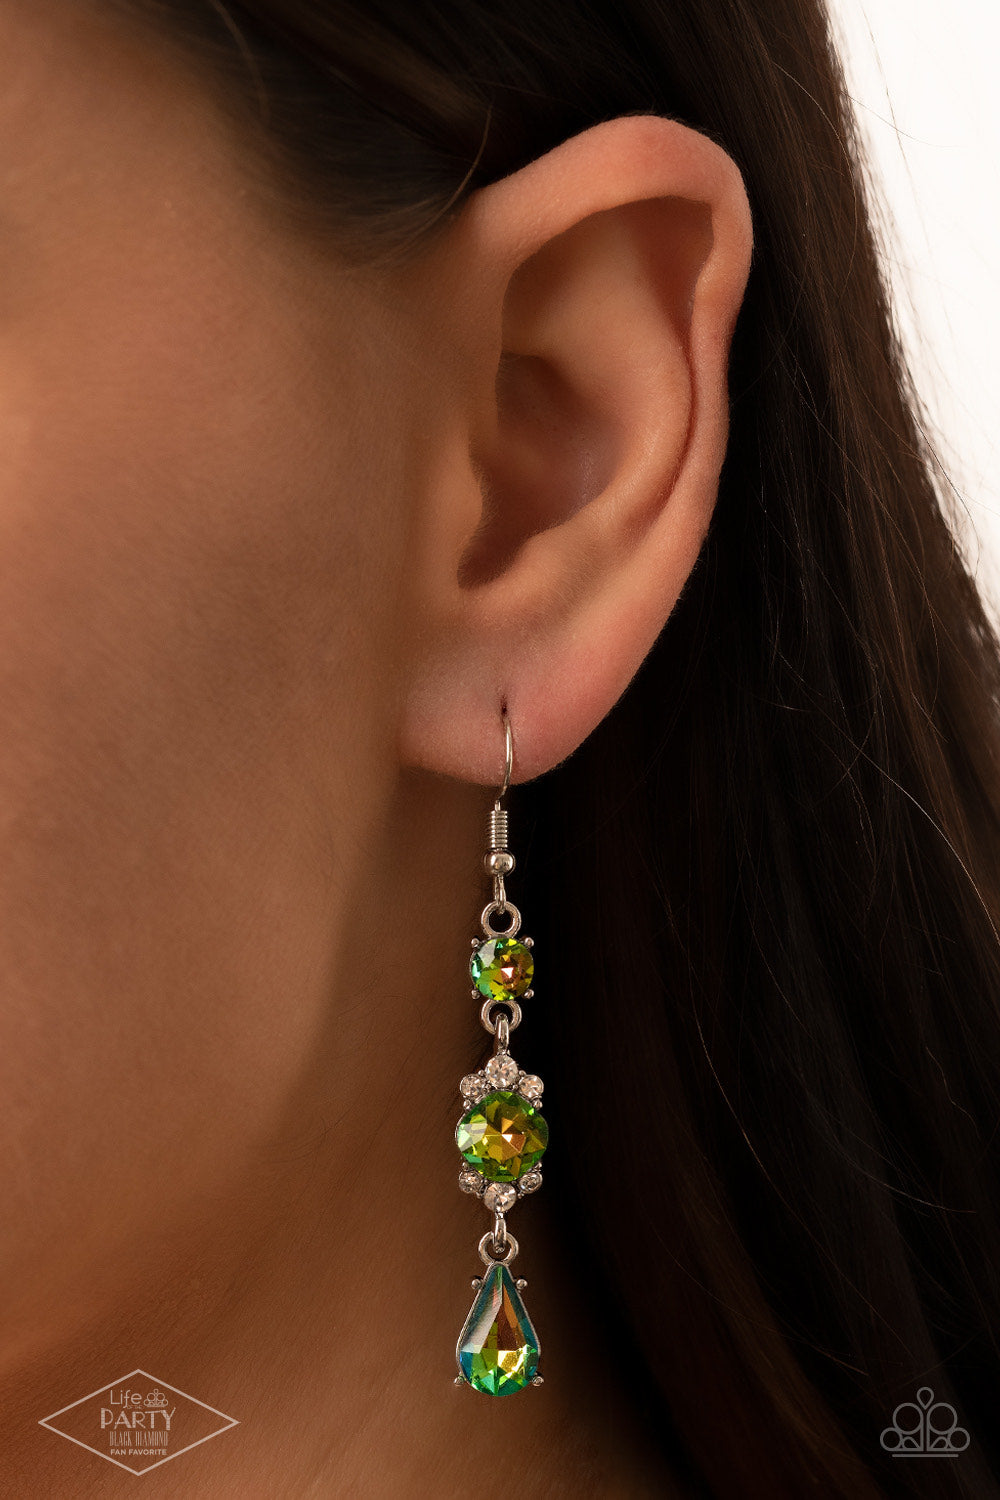 Paparazzi Outstanding Opulence Multi Oil Spill Earring online at AainaasTreasrureBox $5 Jewelry